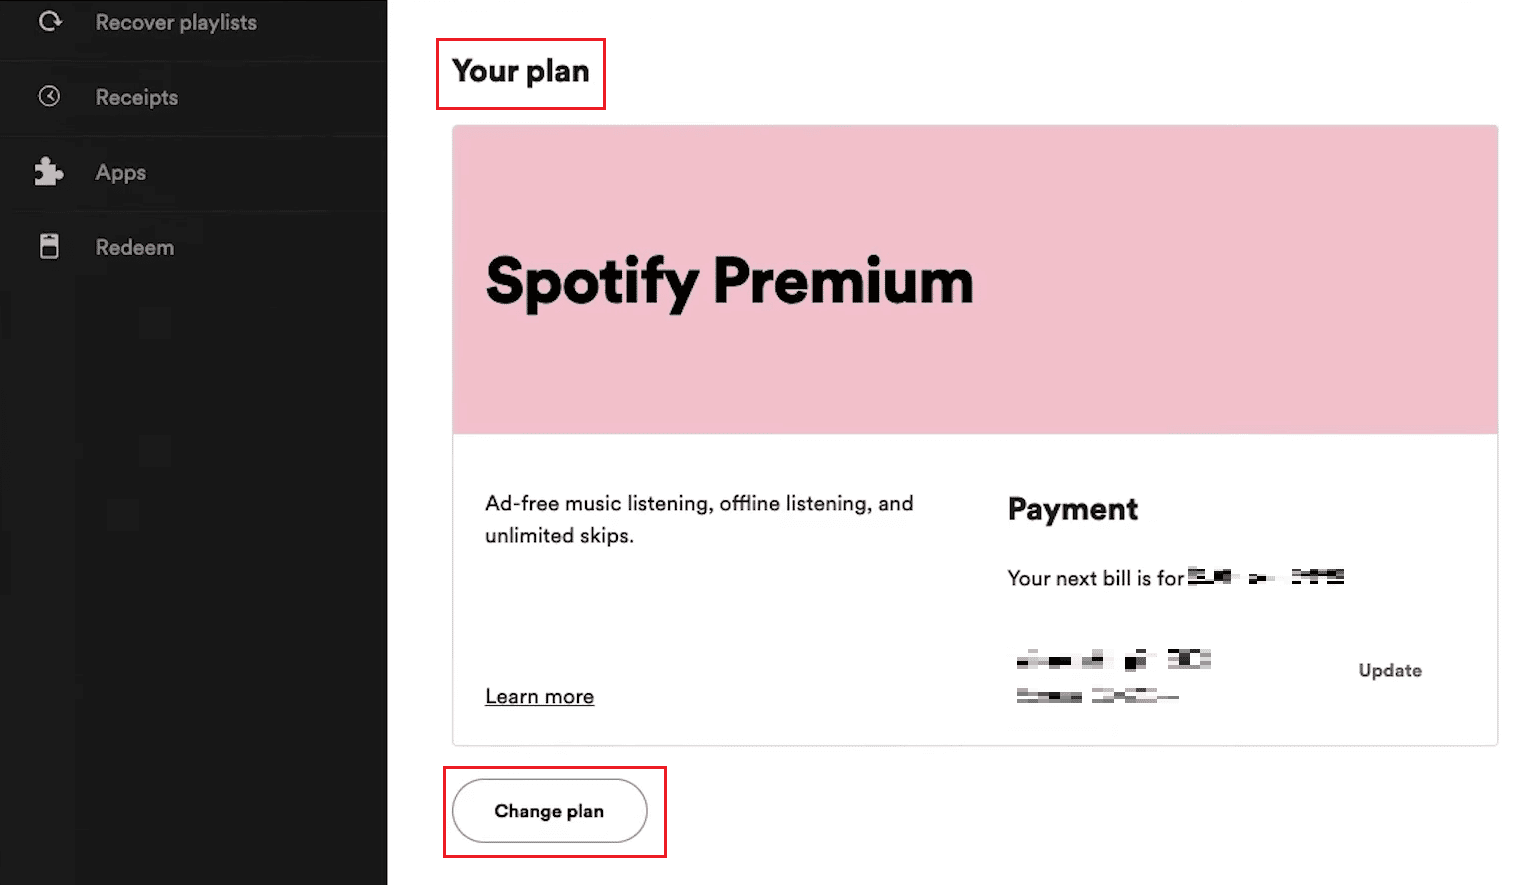 Click on Change plan under the Your Plan section